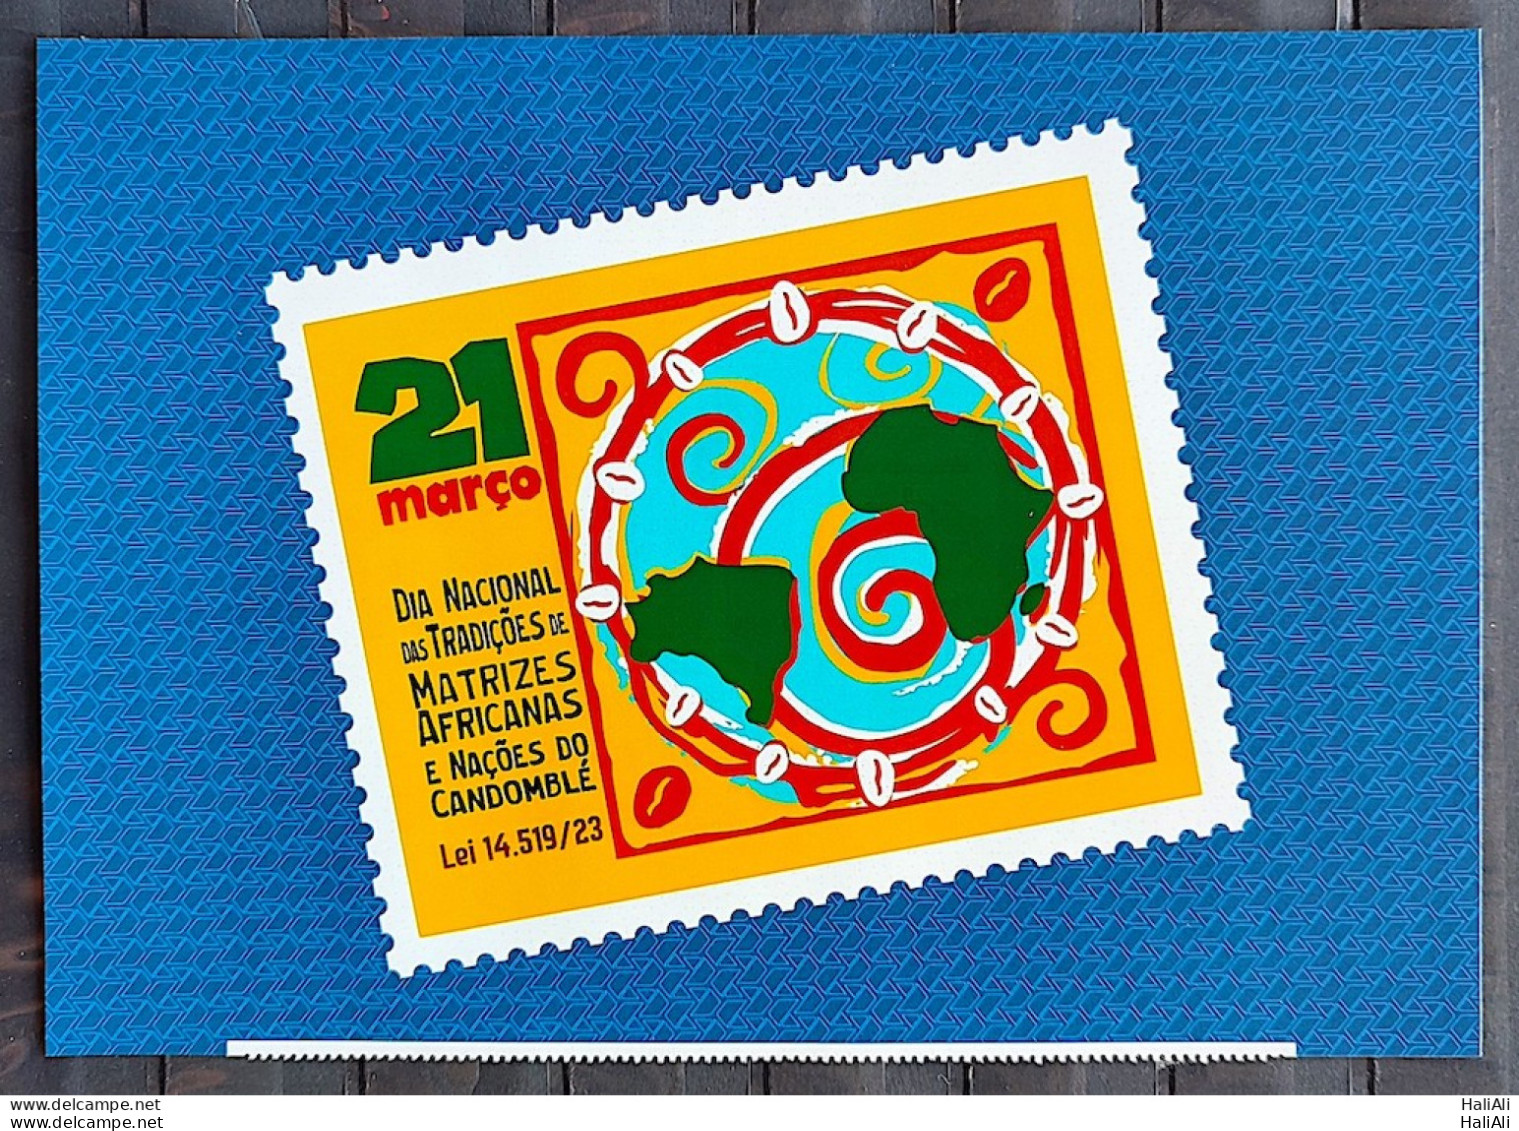 SI 06 Vignette Brazil Institutional Traditions Of African Matrices And Candomble Nations Map 2023 - Personalized Stamps